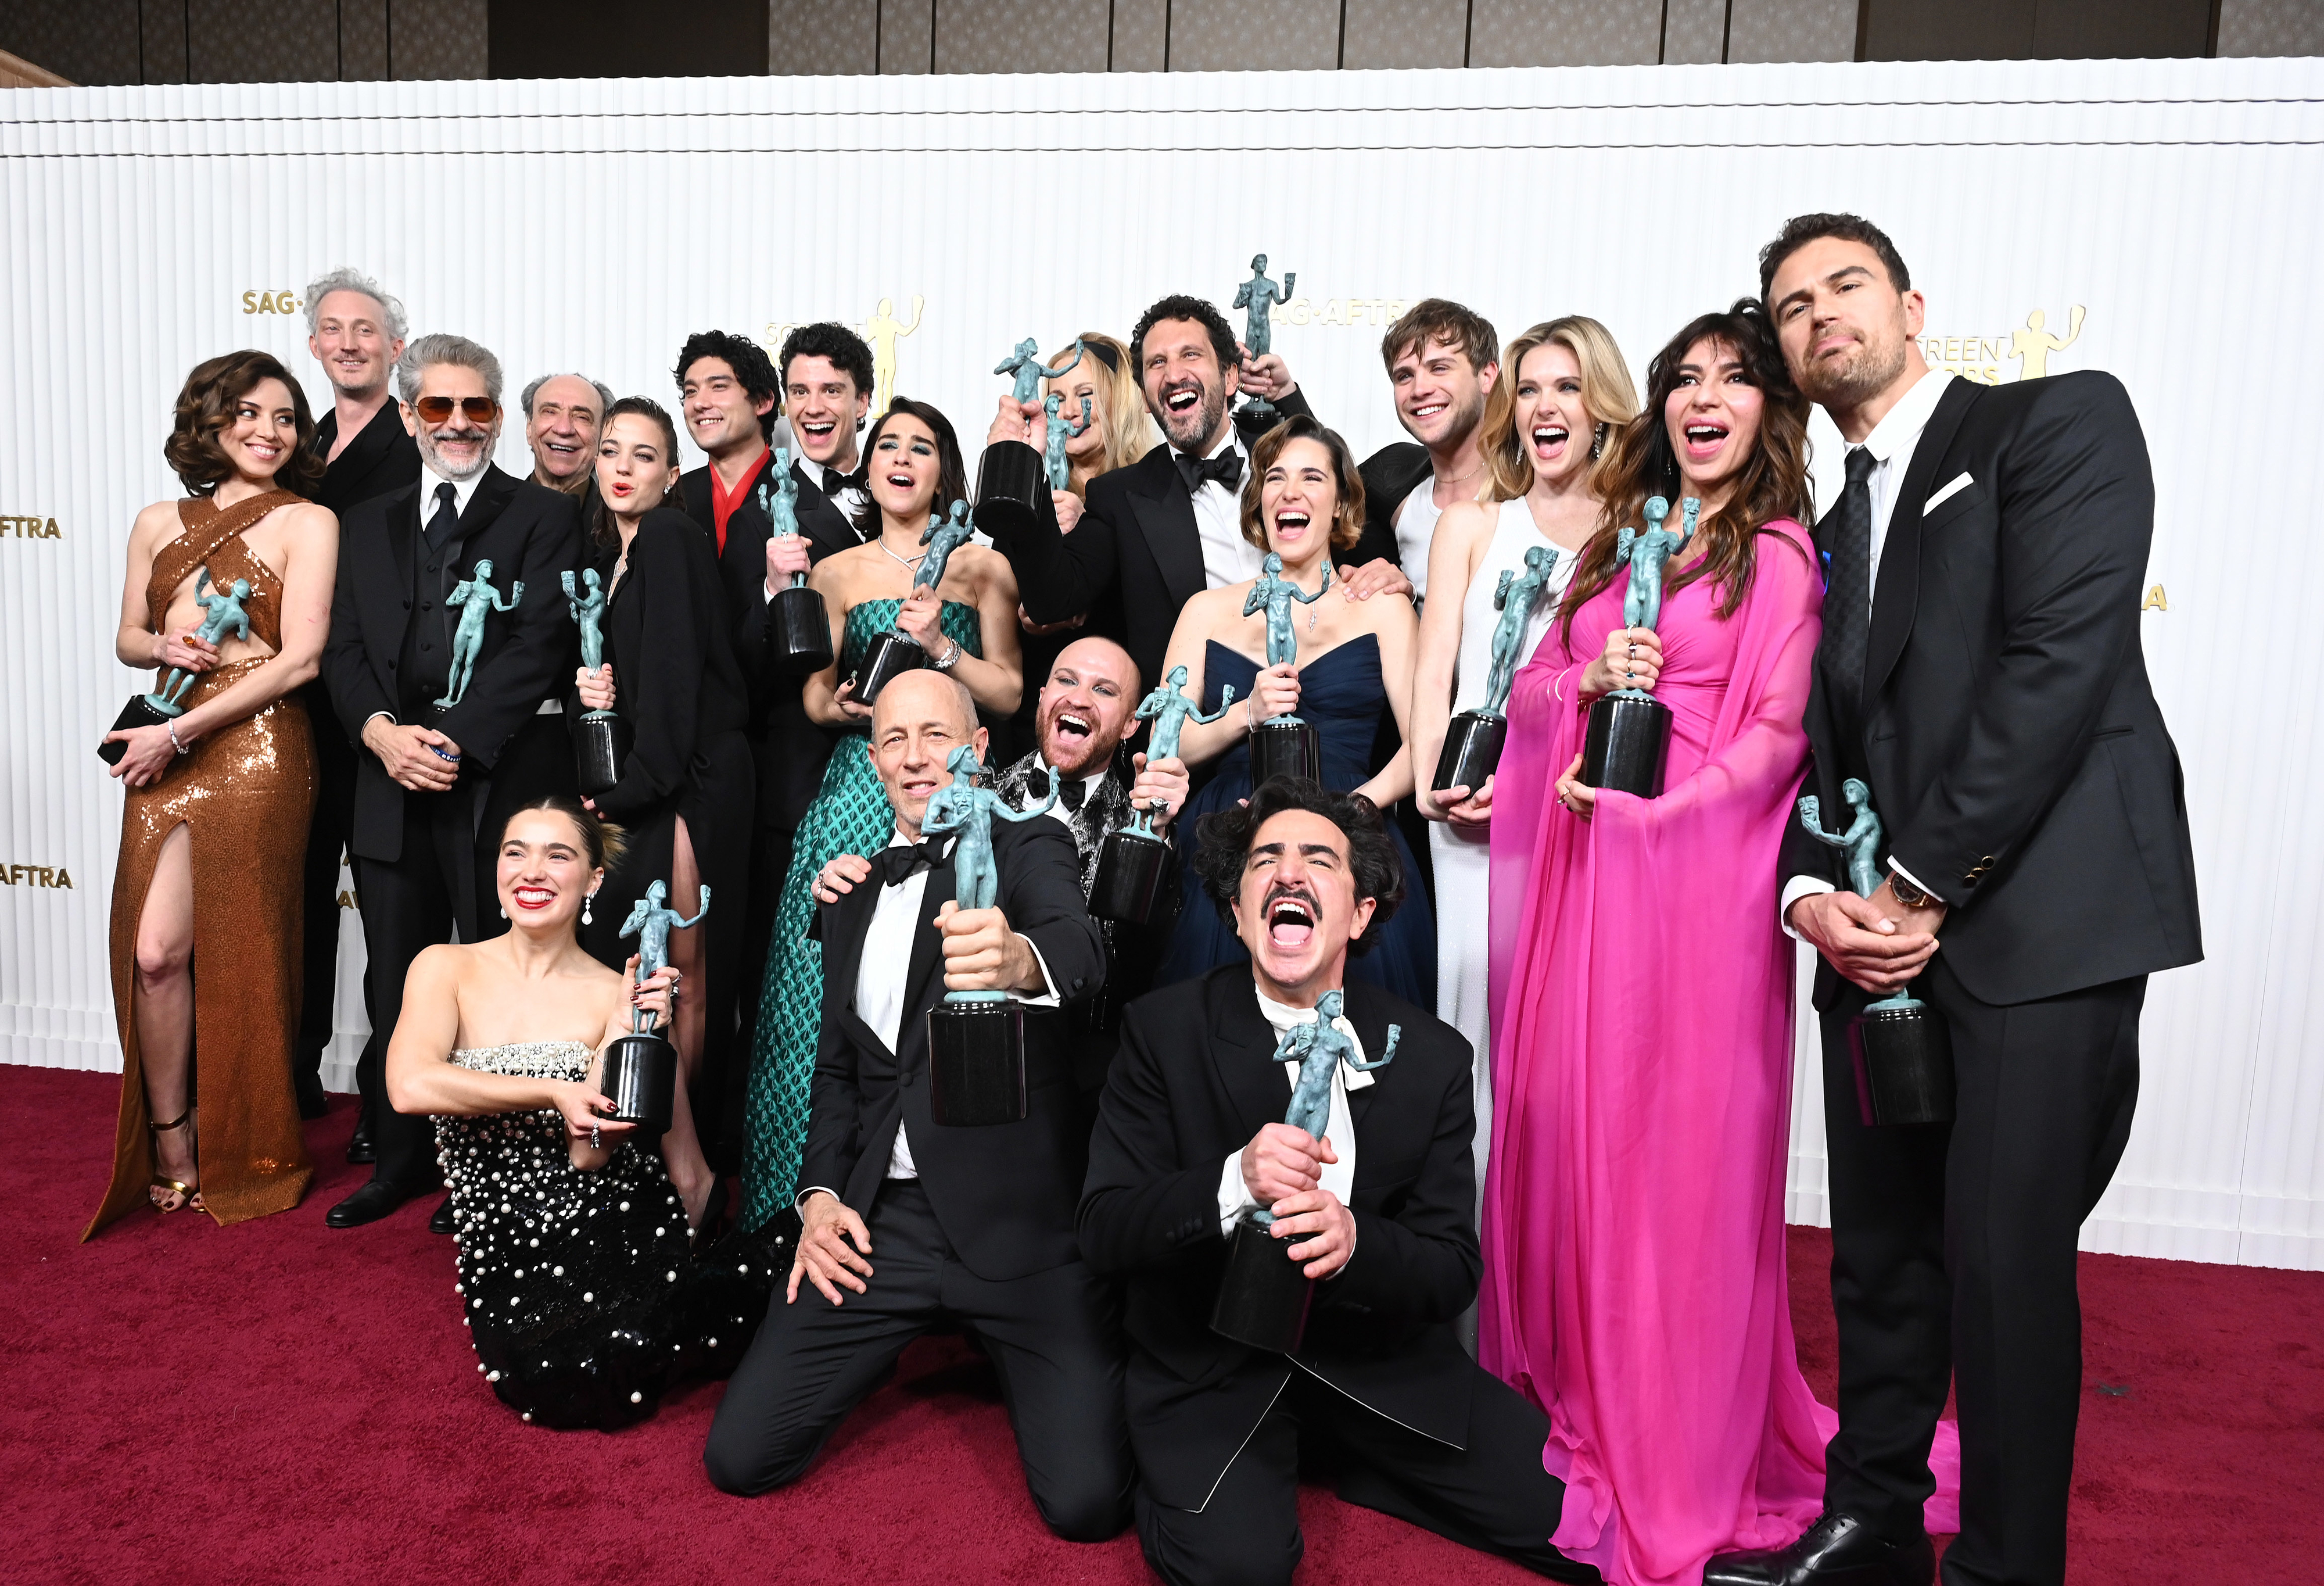 The cast and crew on the red carpet holding awards